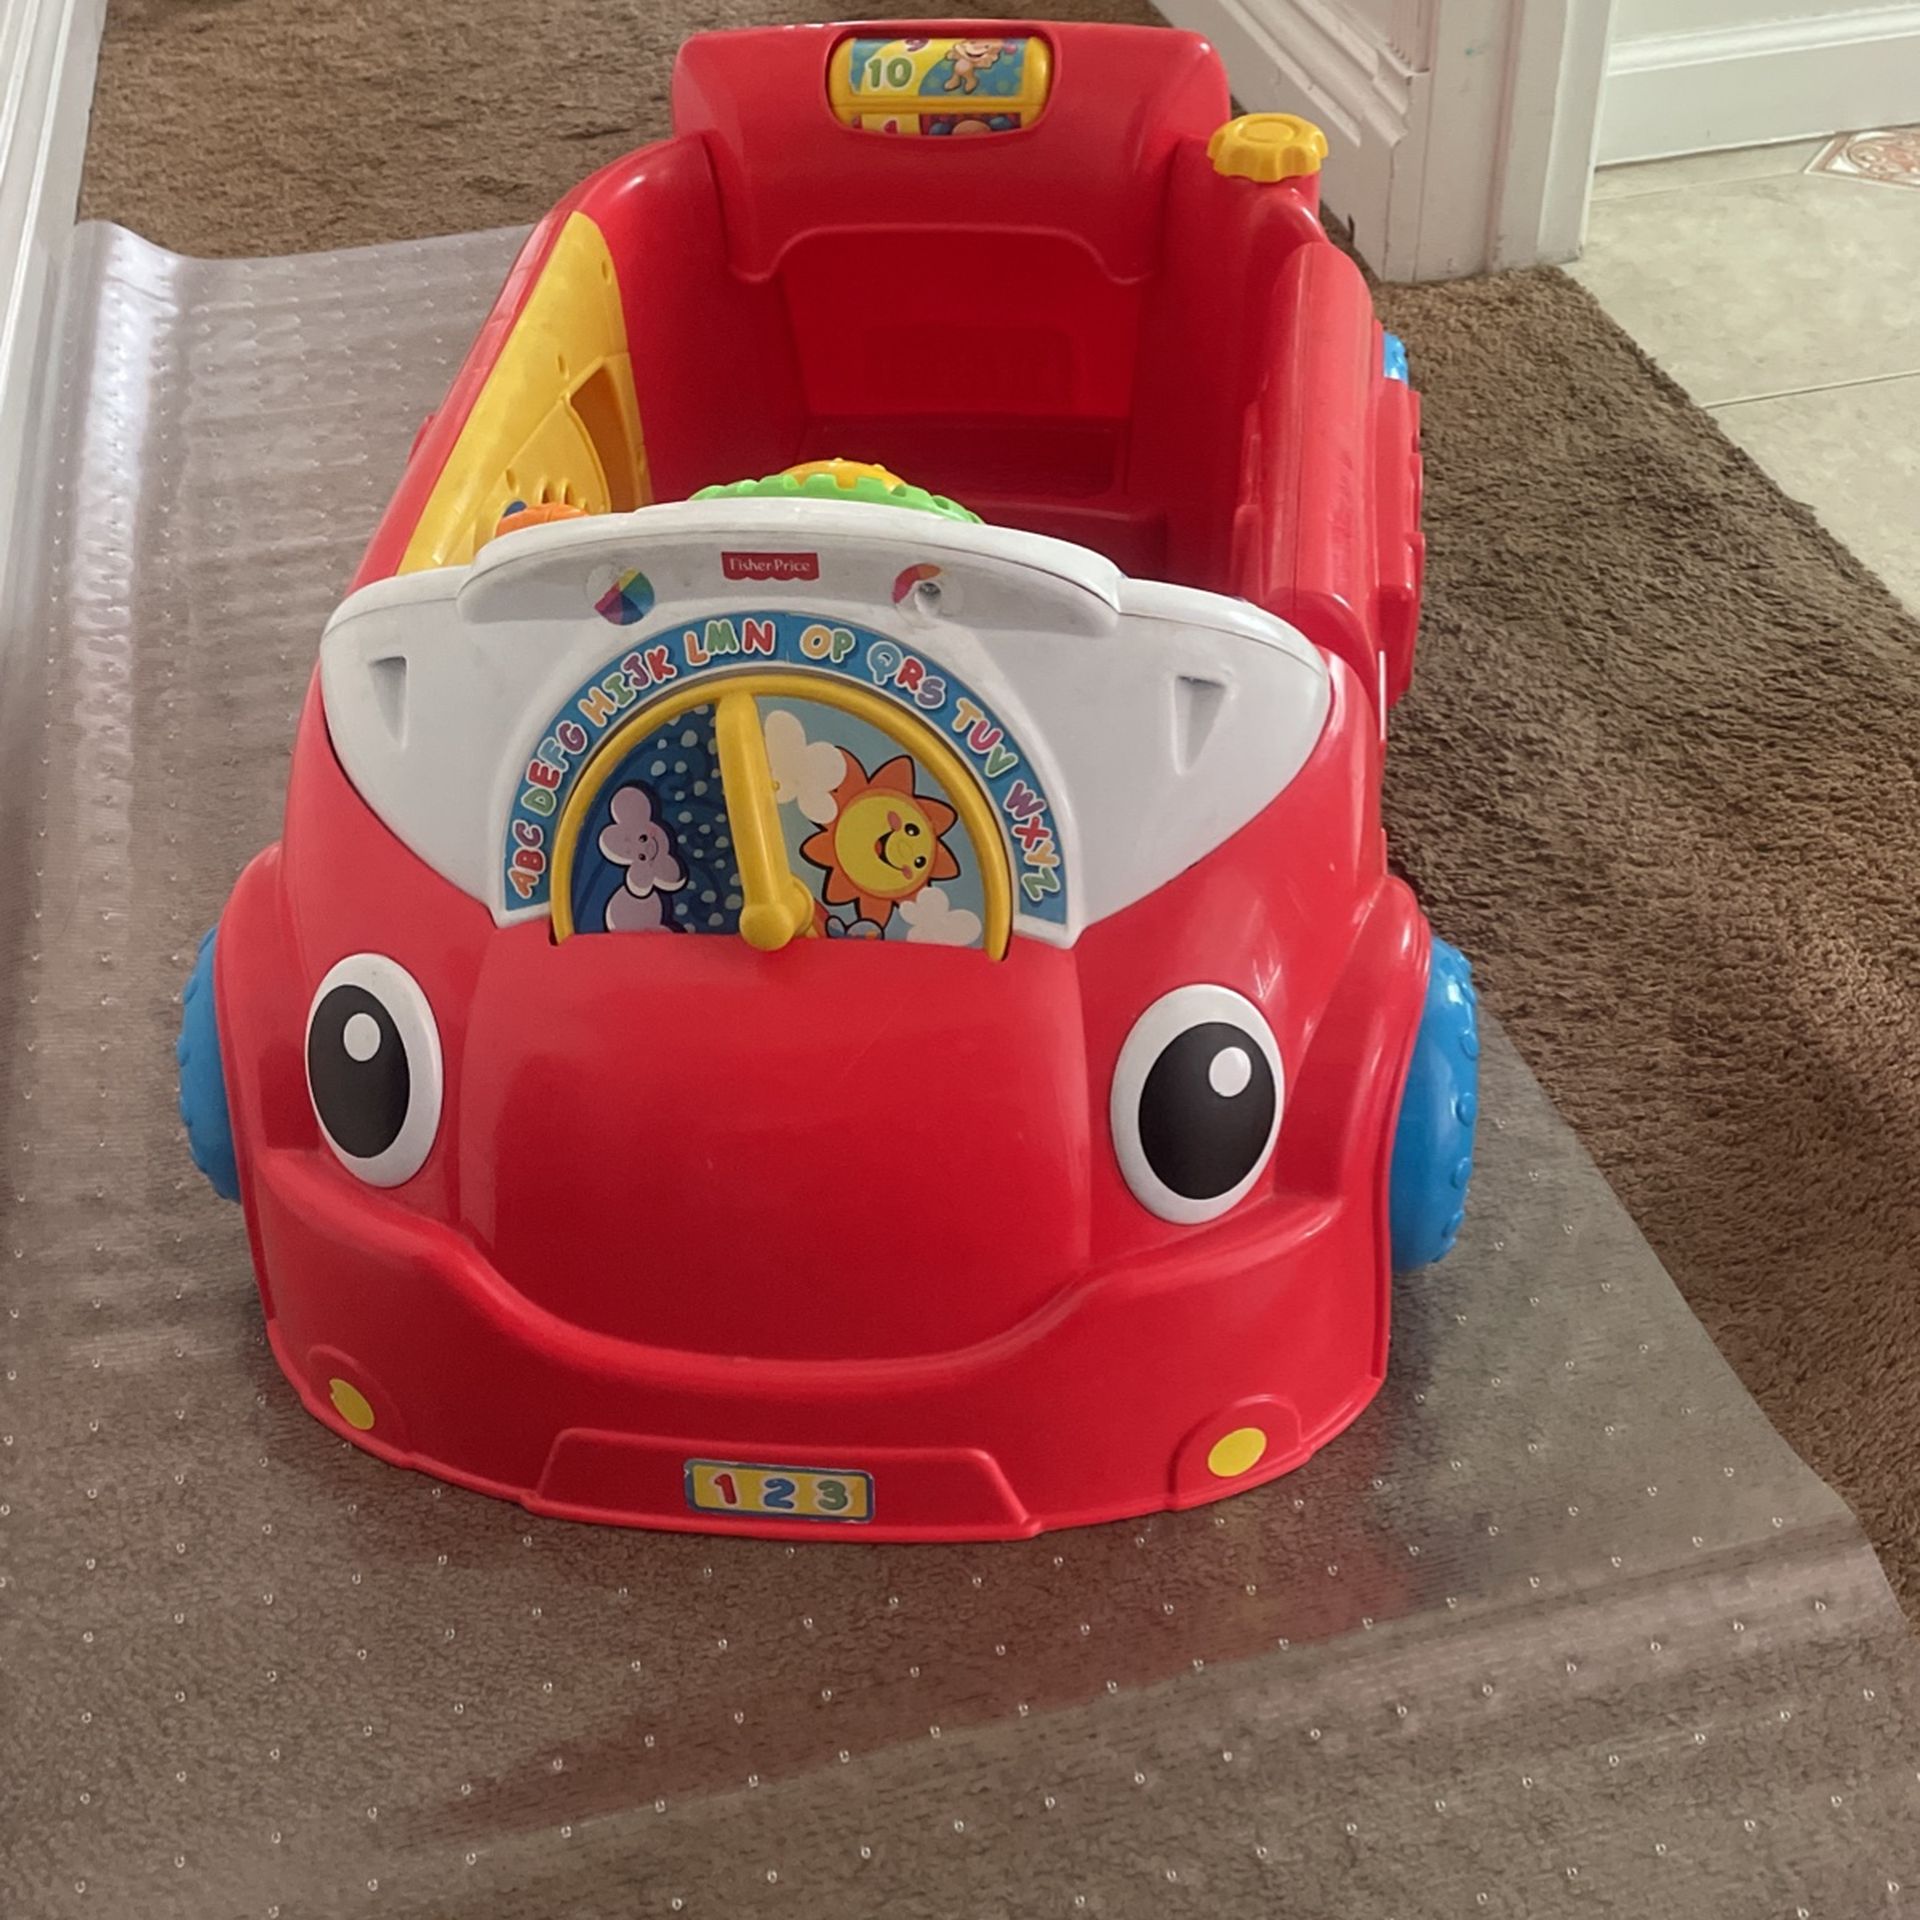 Fisher-Price Baby Toy Laugh & Learn Crawl Around Car Red Activity Center with Educational Music & Lights for Infants Ages 6+ Months